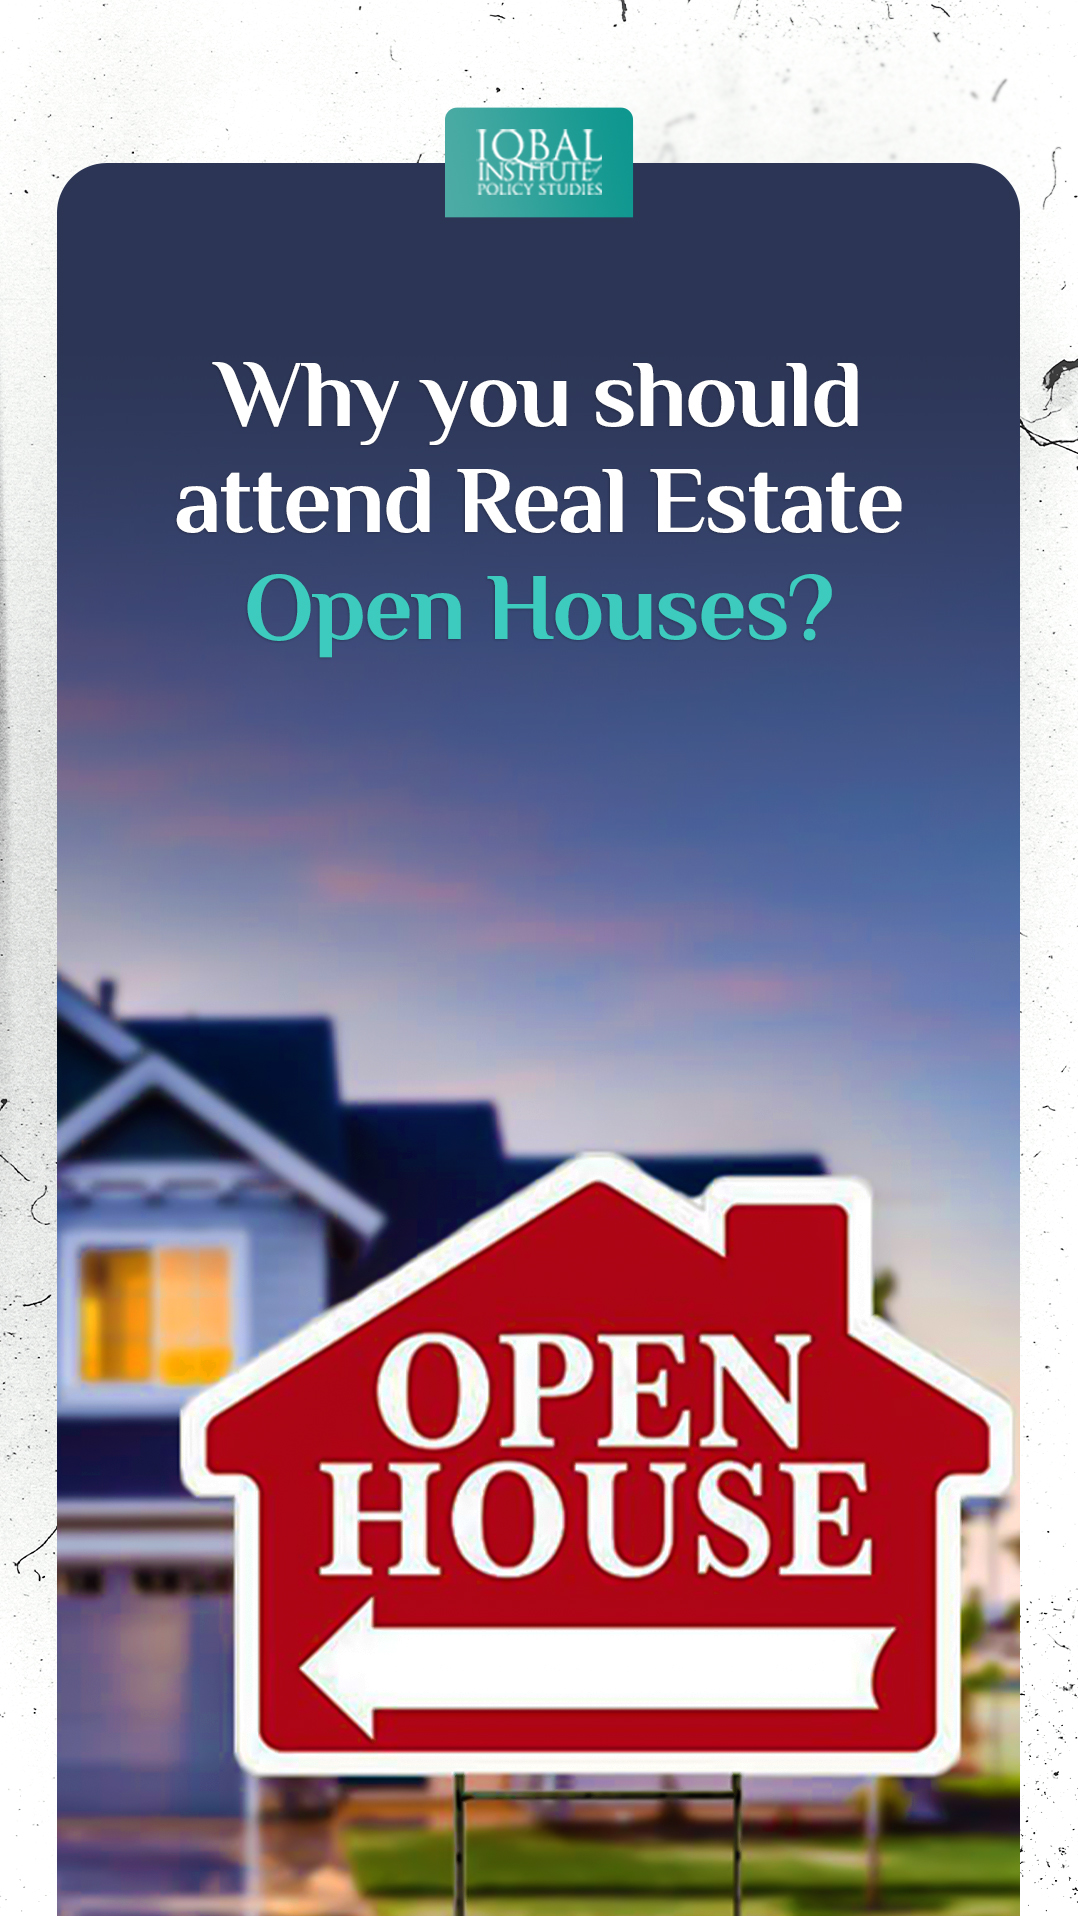 Why you should attend real estate open house ?